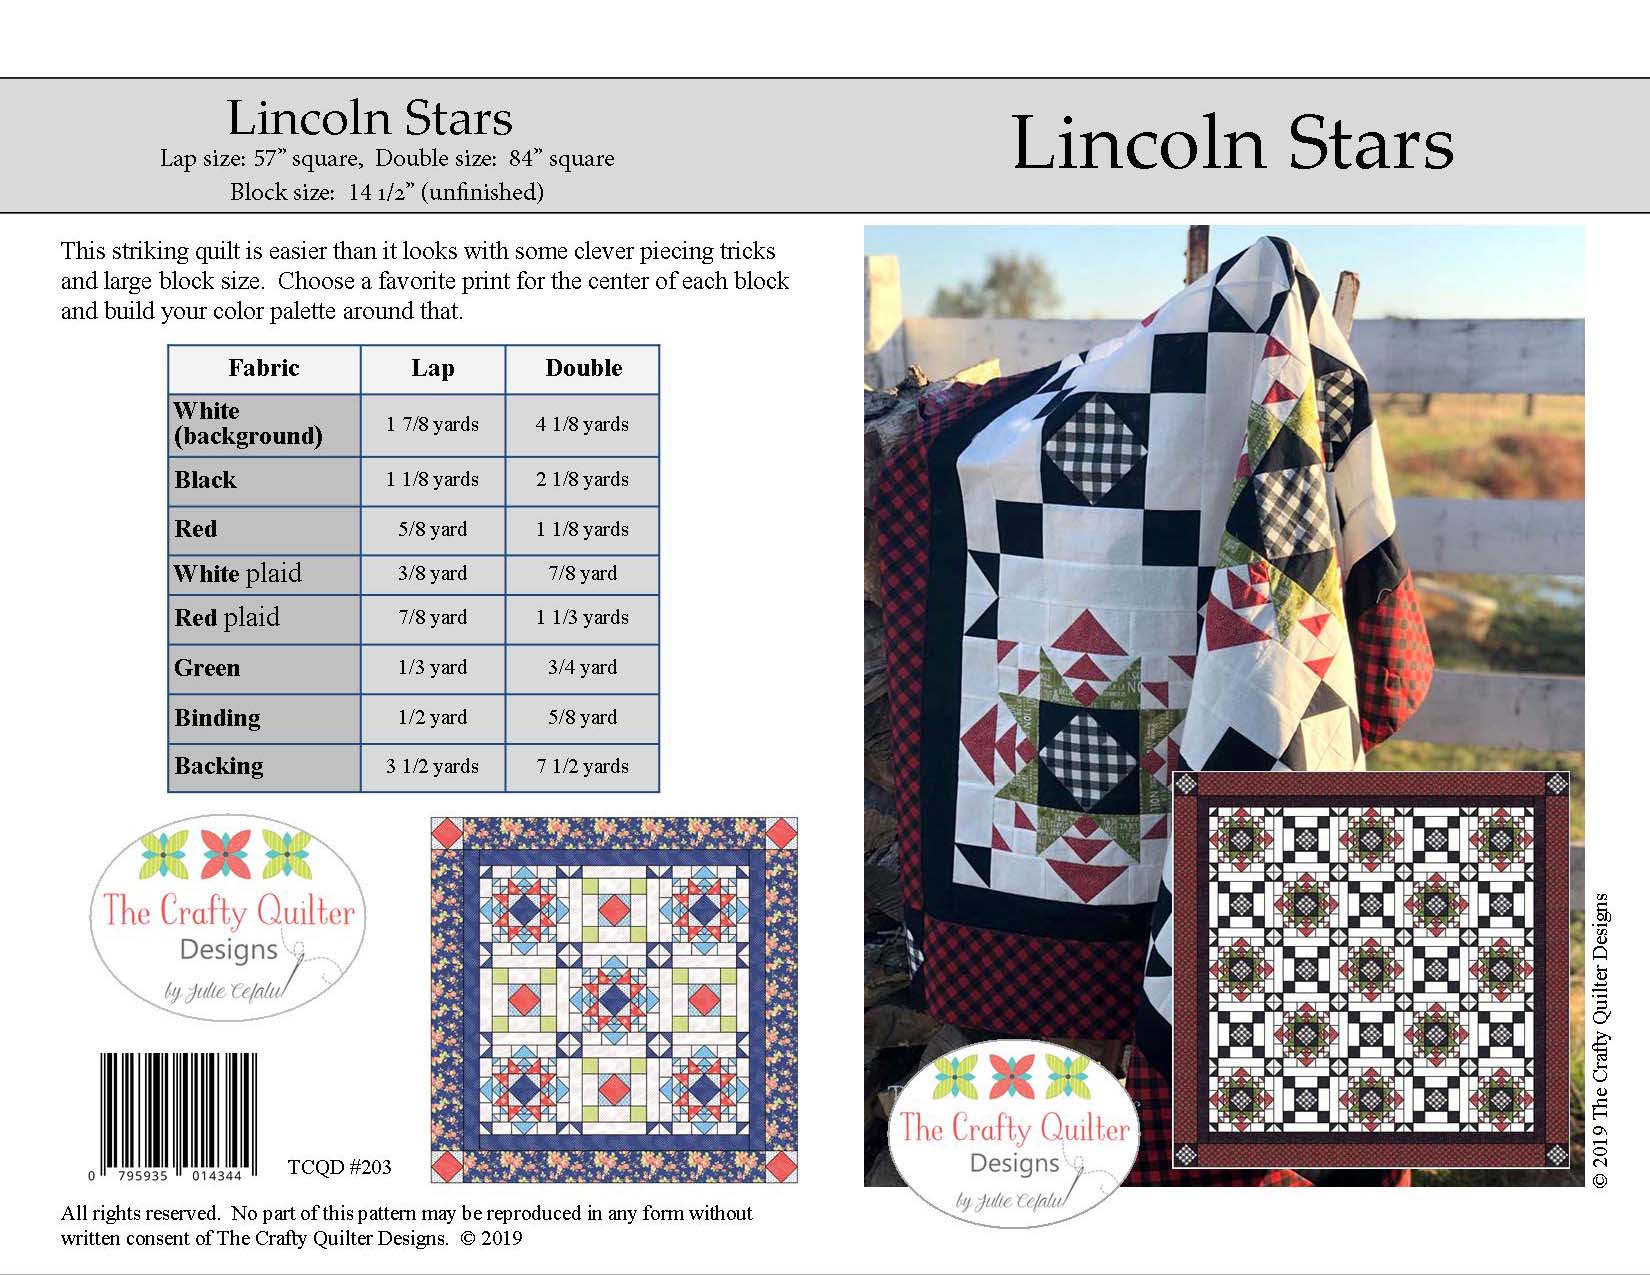 New pattern, Lincoln Stars is on sale!